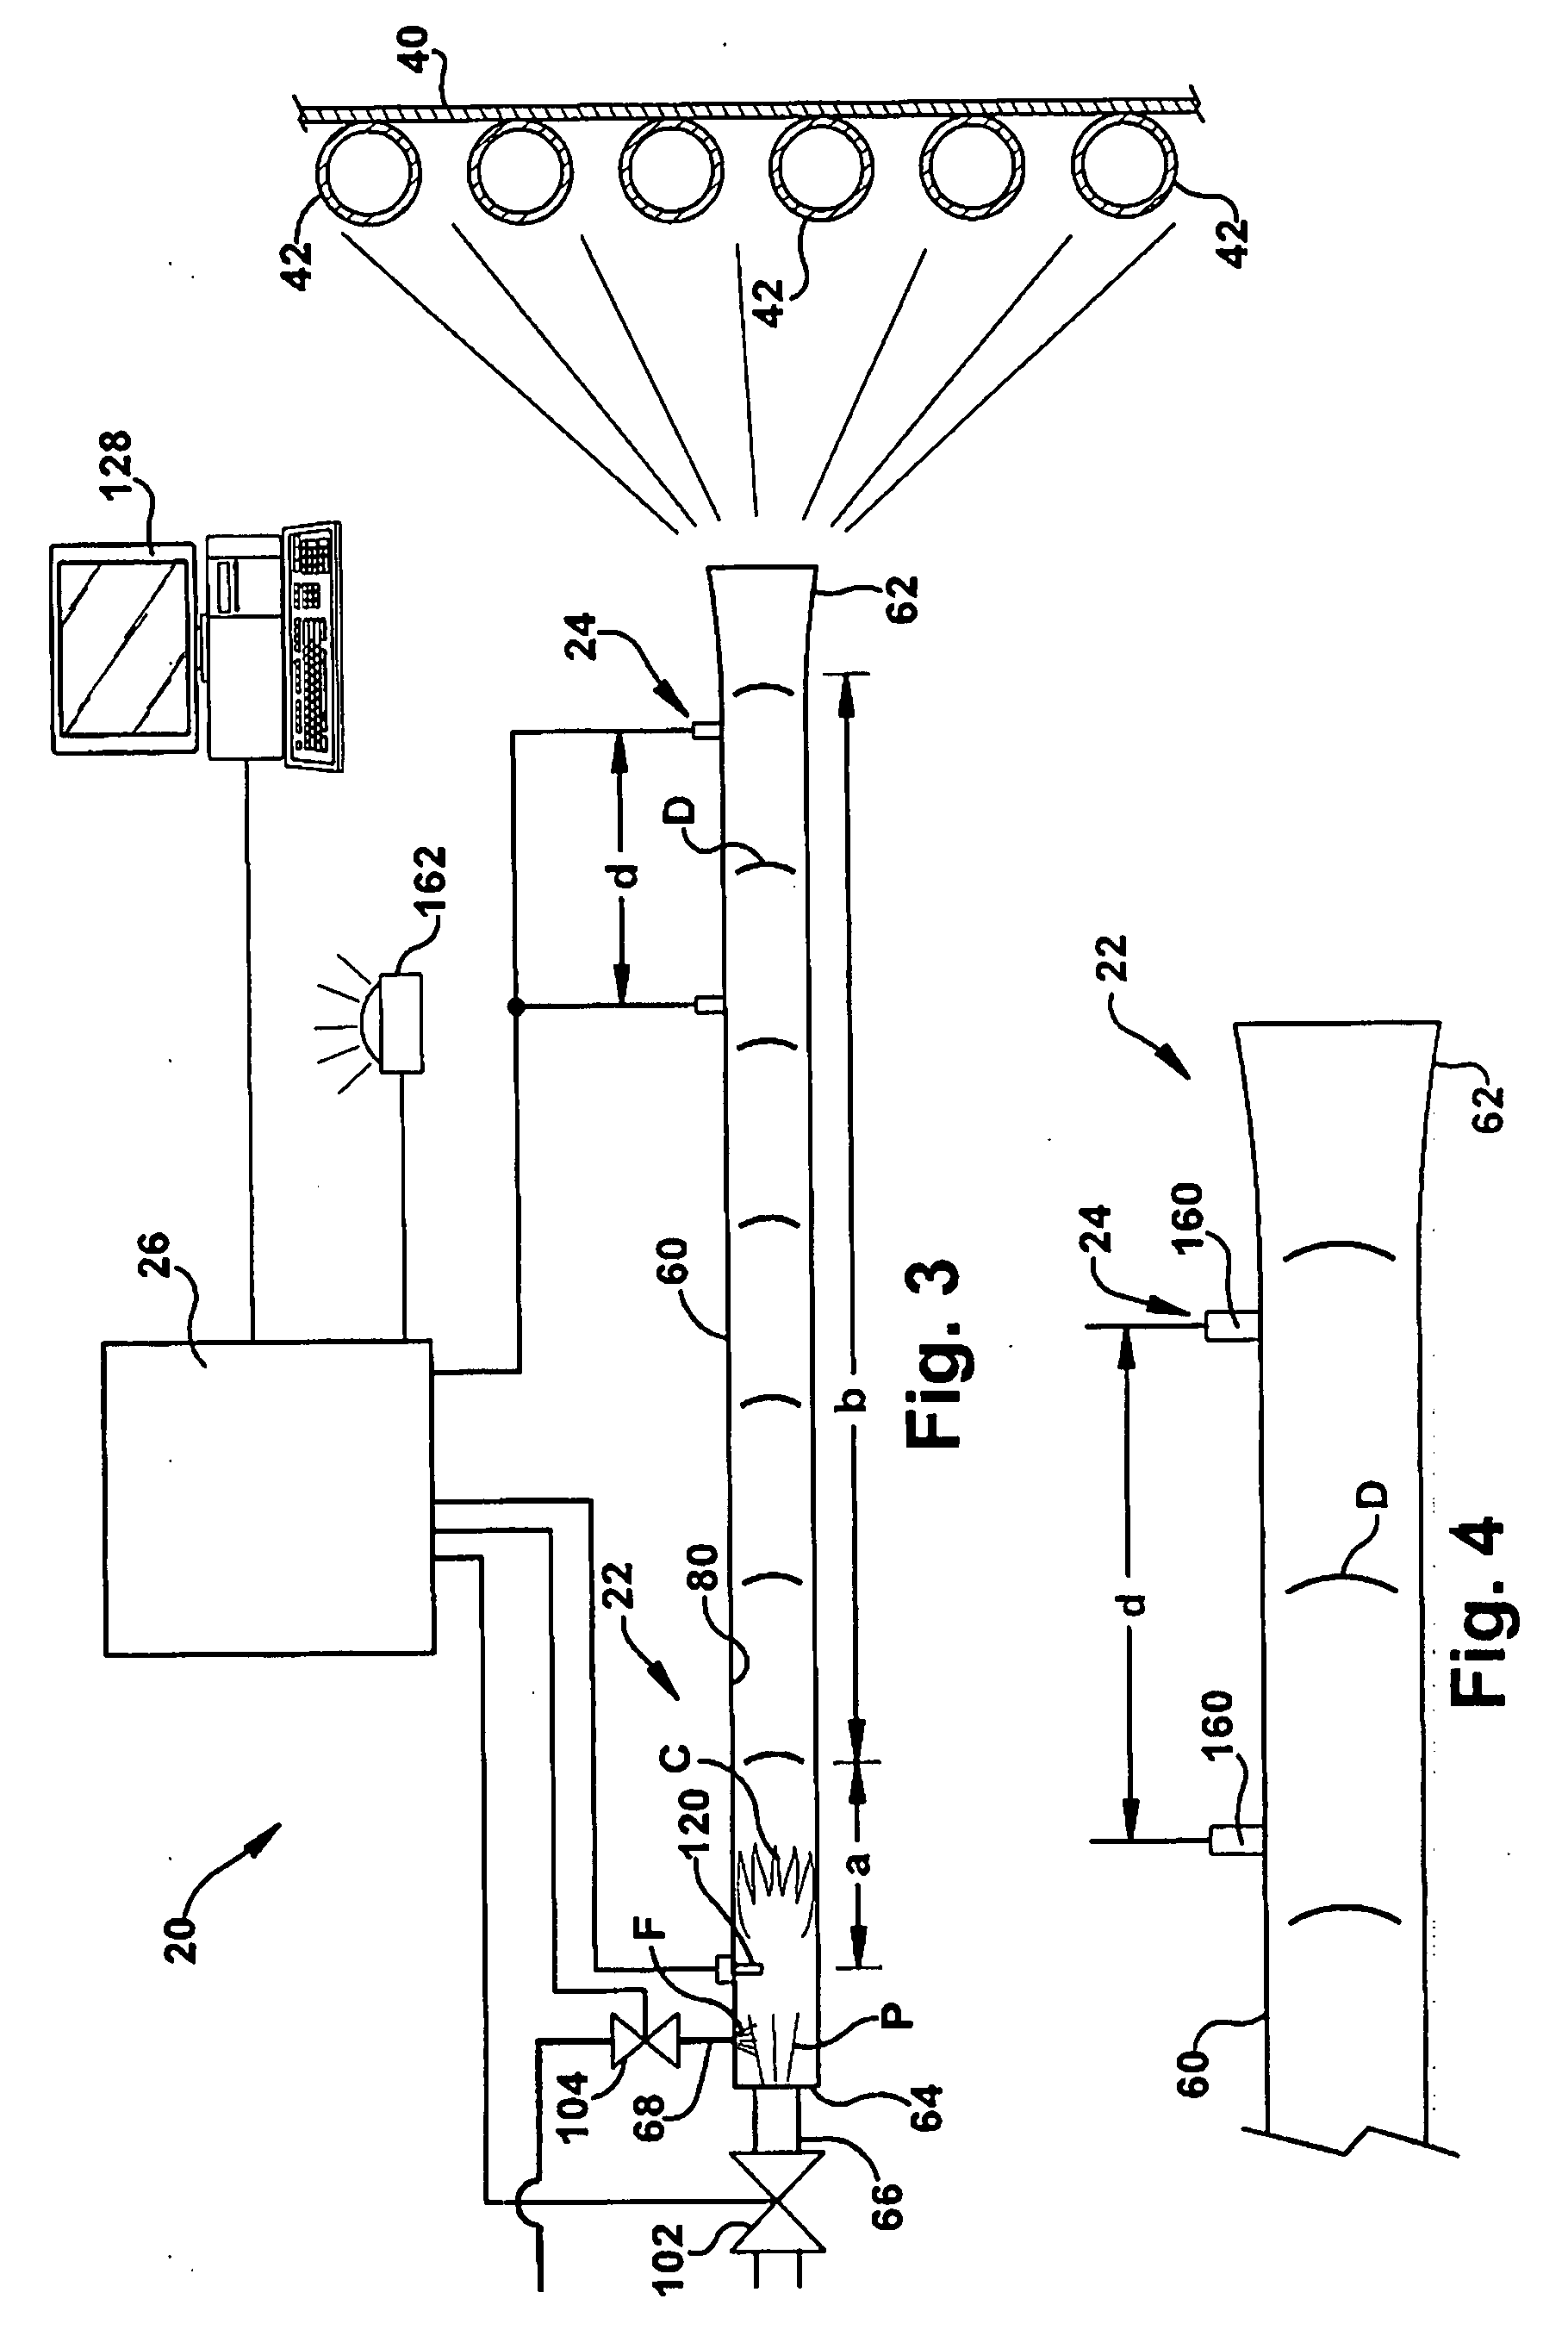 Impulse combustion cleaning system and method